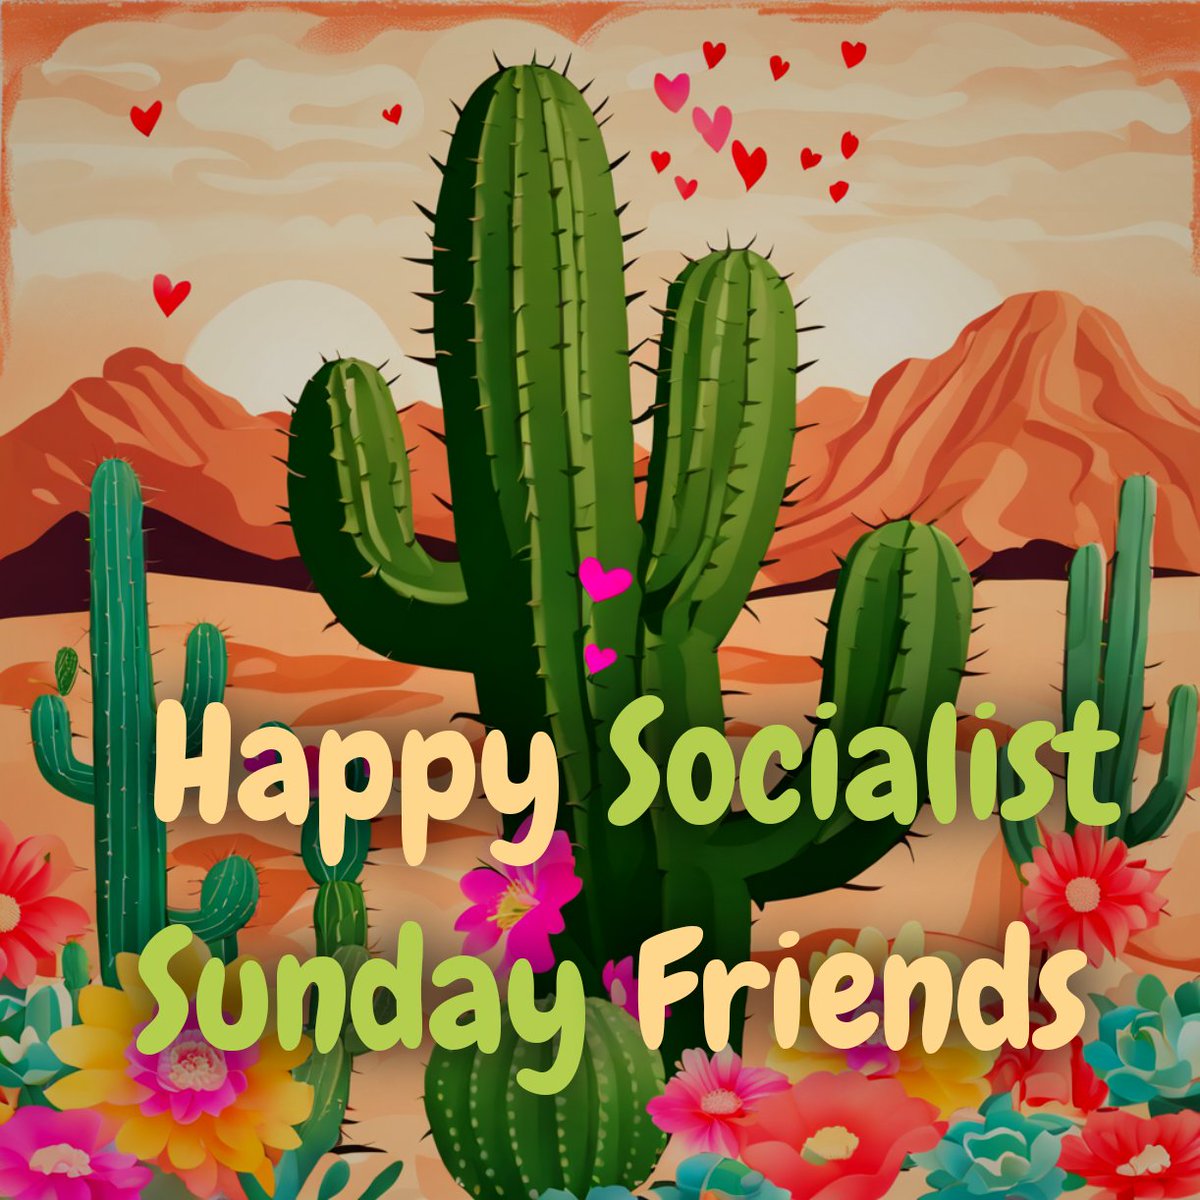 It's that time again! Let's make #Solidarity real! I follow back socialist comrades. #SocialistSunday